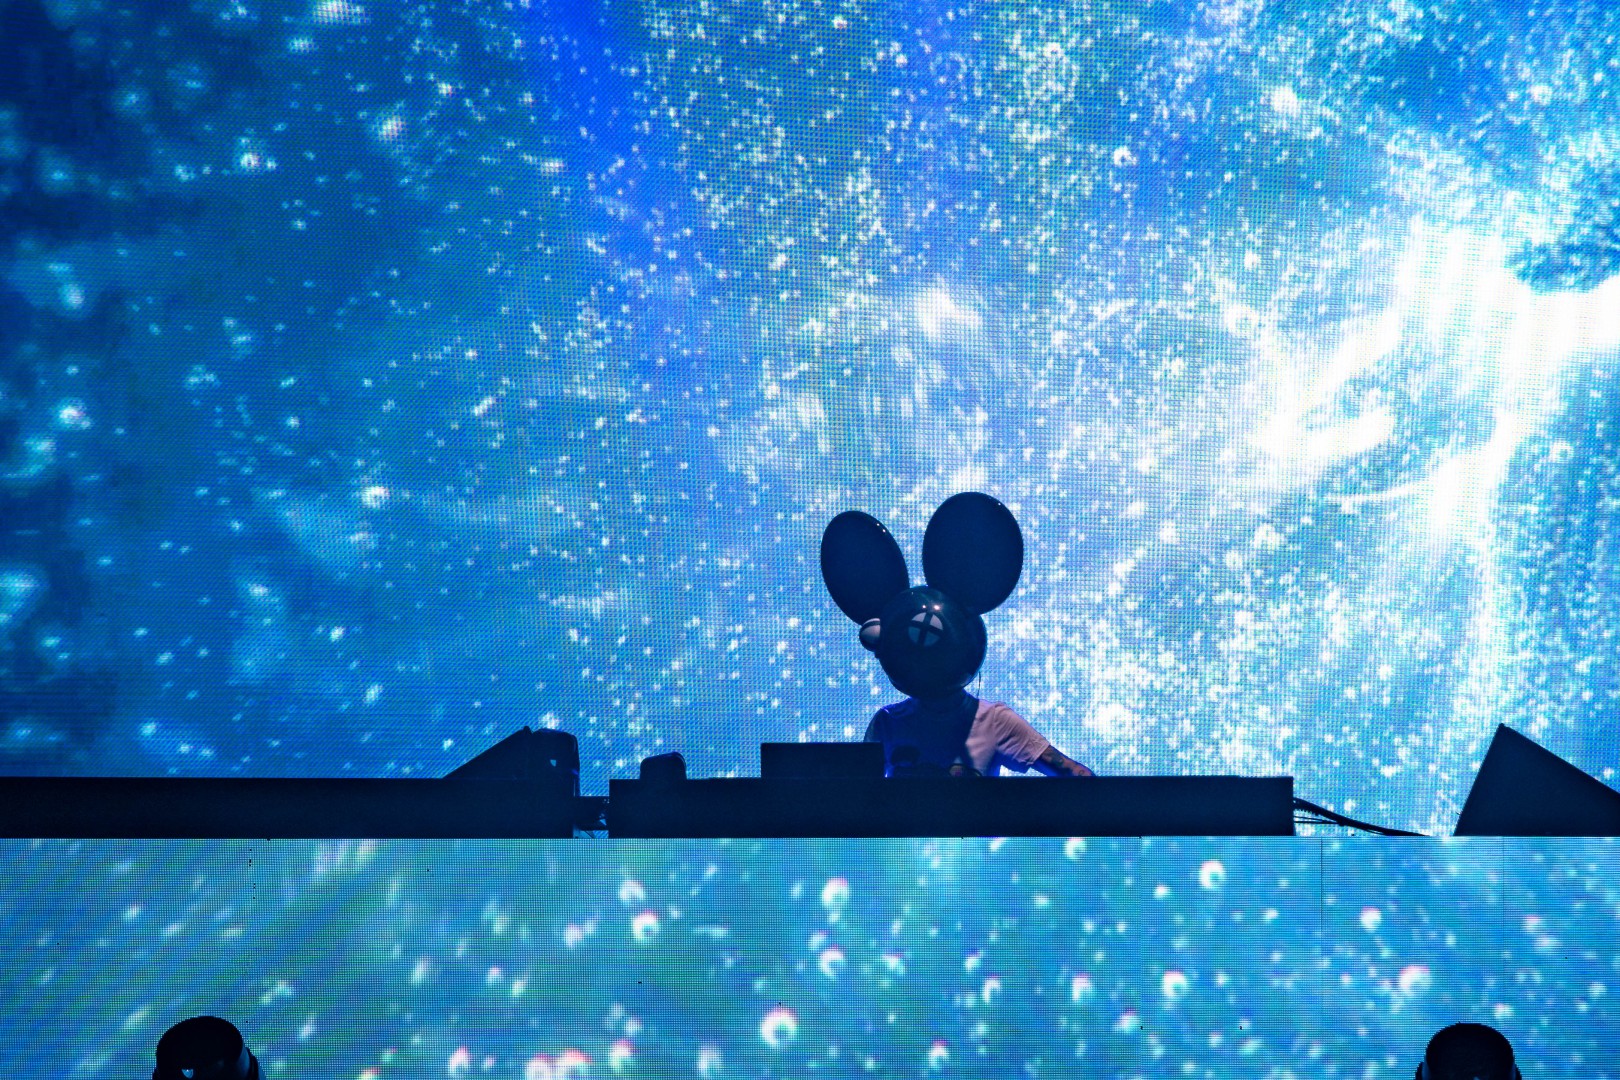 Deadmau5 at National Arena in Bucharest on June 3, 2022 (f803098d55)